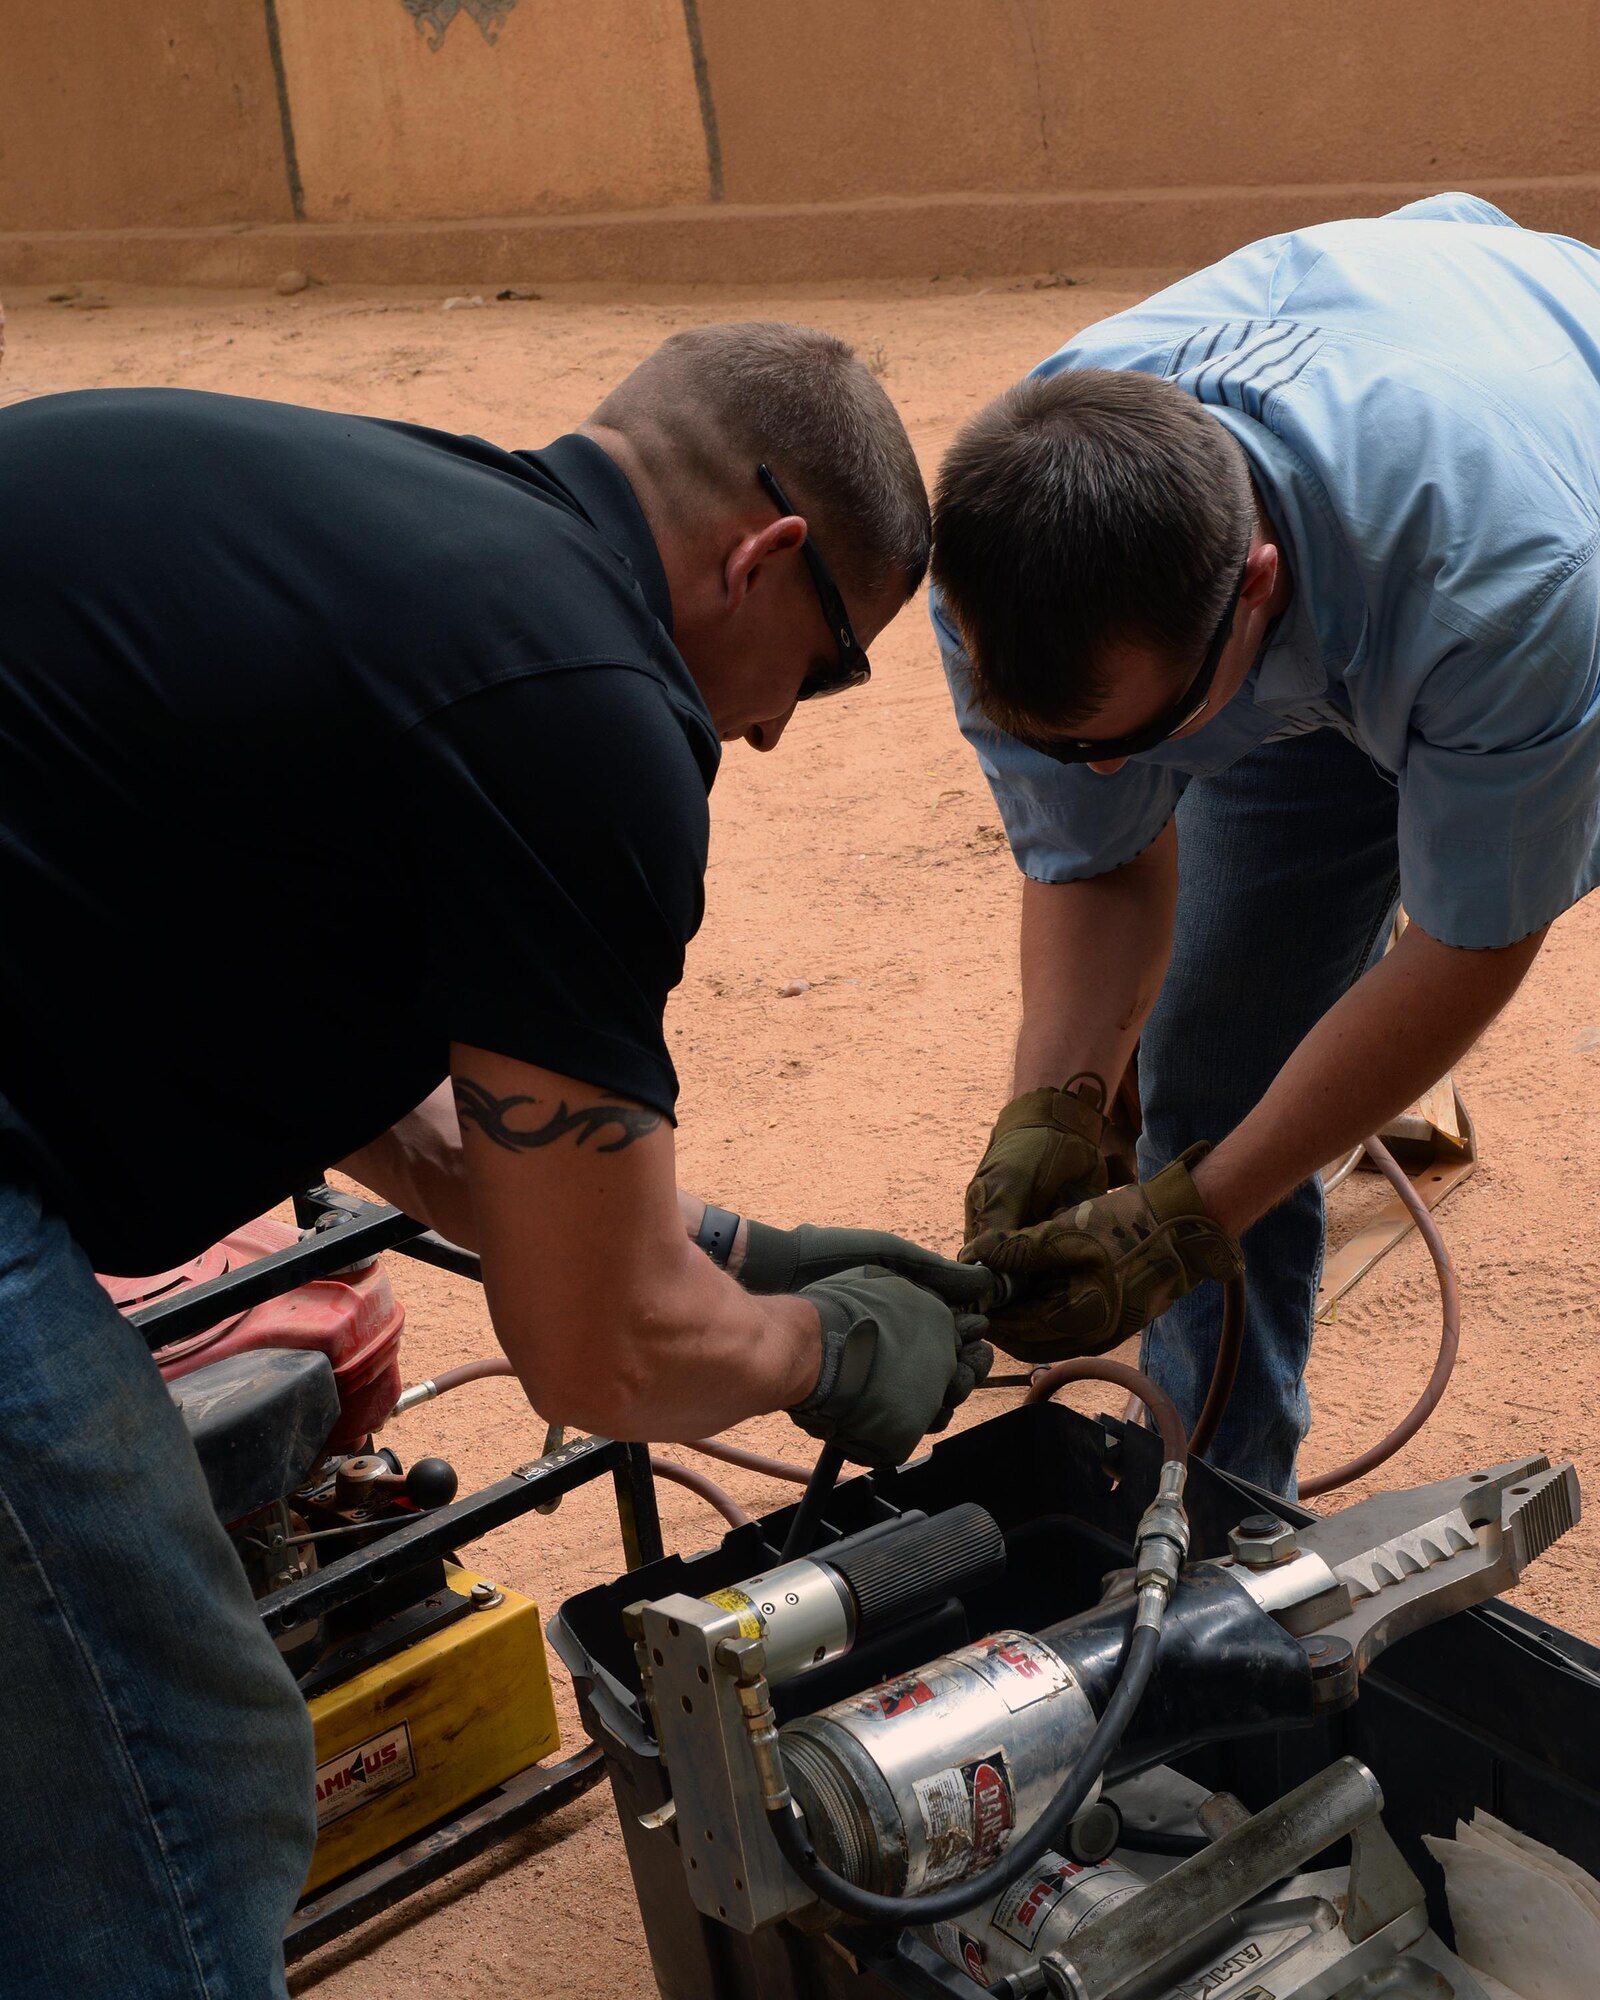 Master Sgt. Gerald Allen, left, 724th Expeditionary Air Base Squadron Fire Department assistant chief of operations, and Senior Airmen Jayden Steier, 724th EABS Fire Department driver operator, connect a combination spreader tool to a motor driven hydraulic pump in Agadez, Niger, May 16, 2017. The combination spreader tool is a hydraulic rescue tool, commonly referred to as the Jaws of Life, firefighters use to extricate a person trapped in an emergency situation. (U.S. Air Force photo by Senior Airman Jimmie D. Pike)